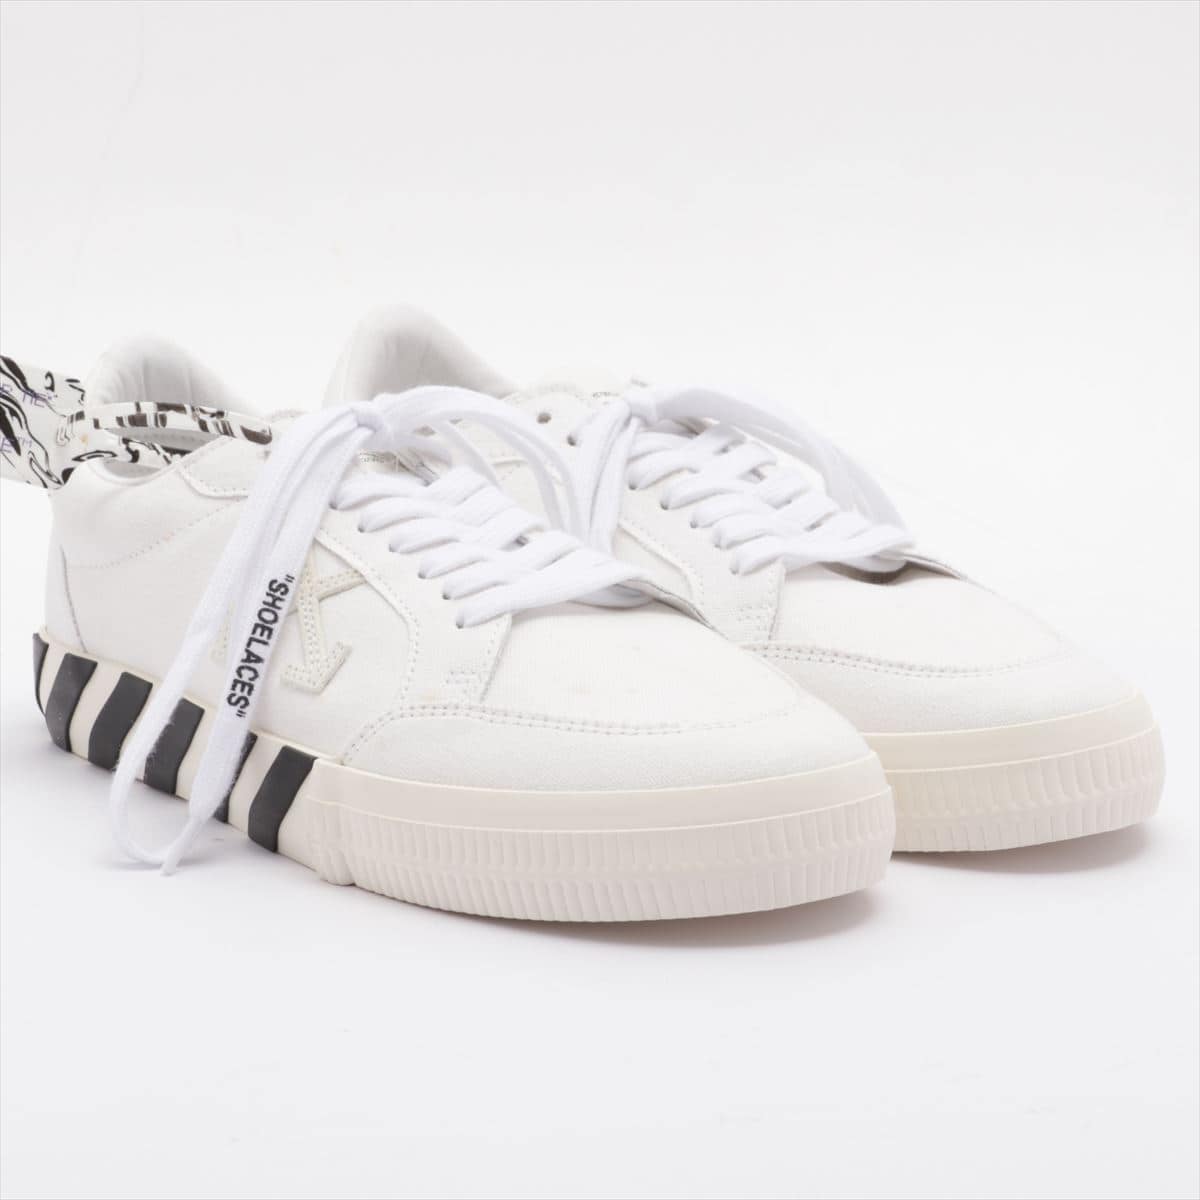 Off-White ROVAL CANIZE Canvas & leather Sneakers 43 Men's White